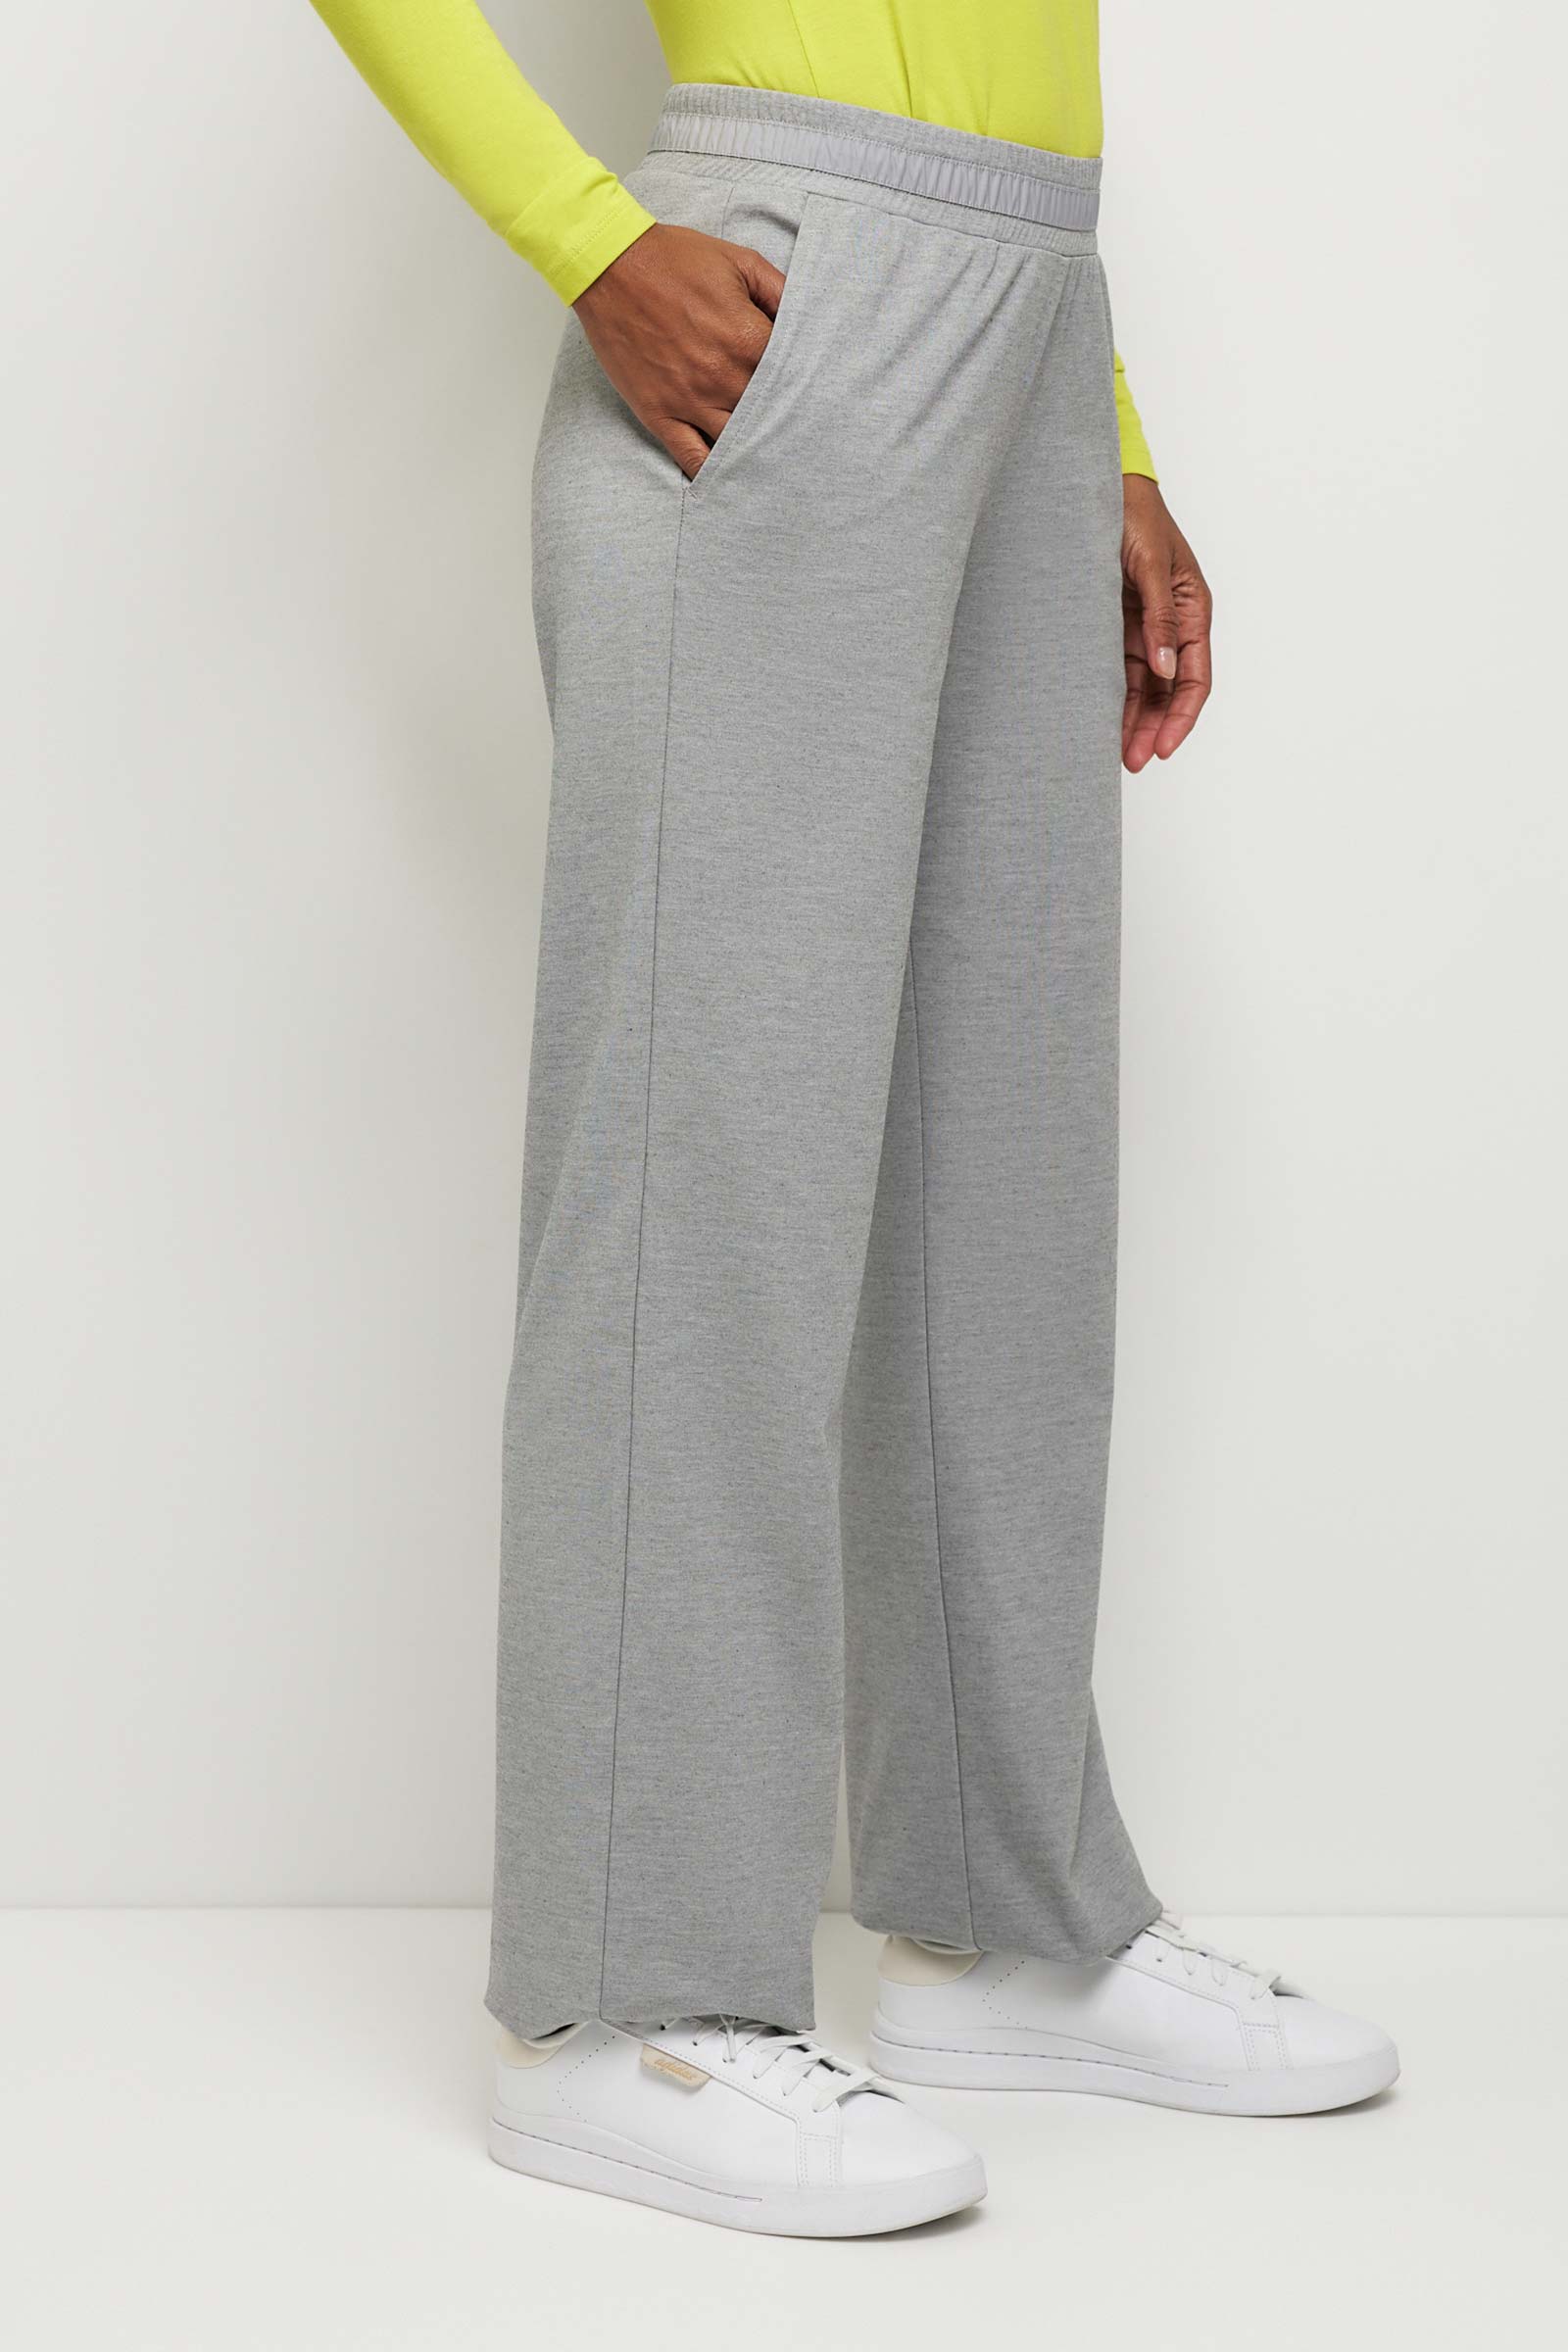 The Best Travel Pants. Woman Showing the Side Profile of a Kaia Pant in Light Heather Grey.